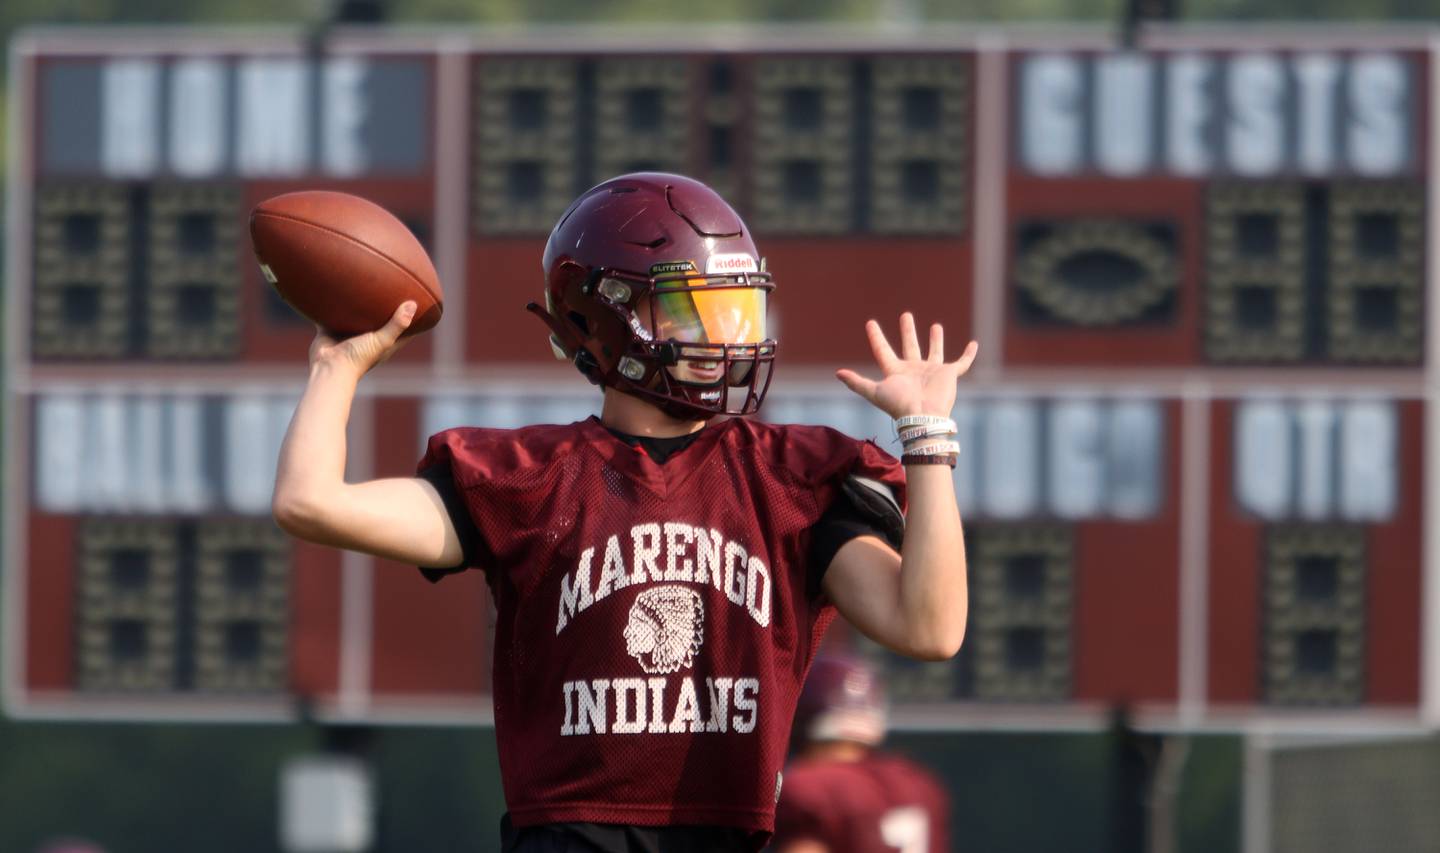 David Lopez throws the ball during Marengo High School football practice Tuesday morning.